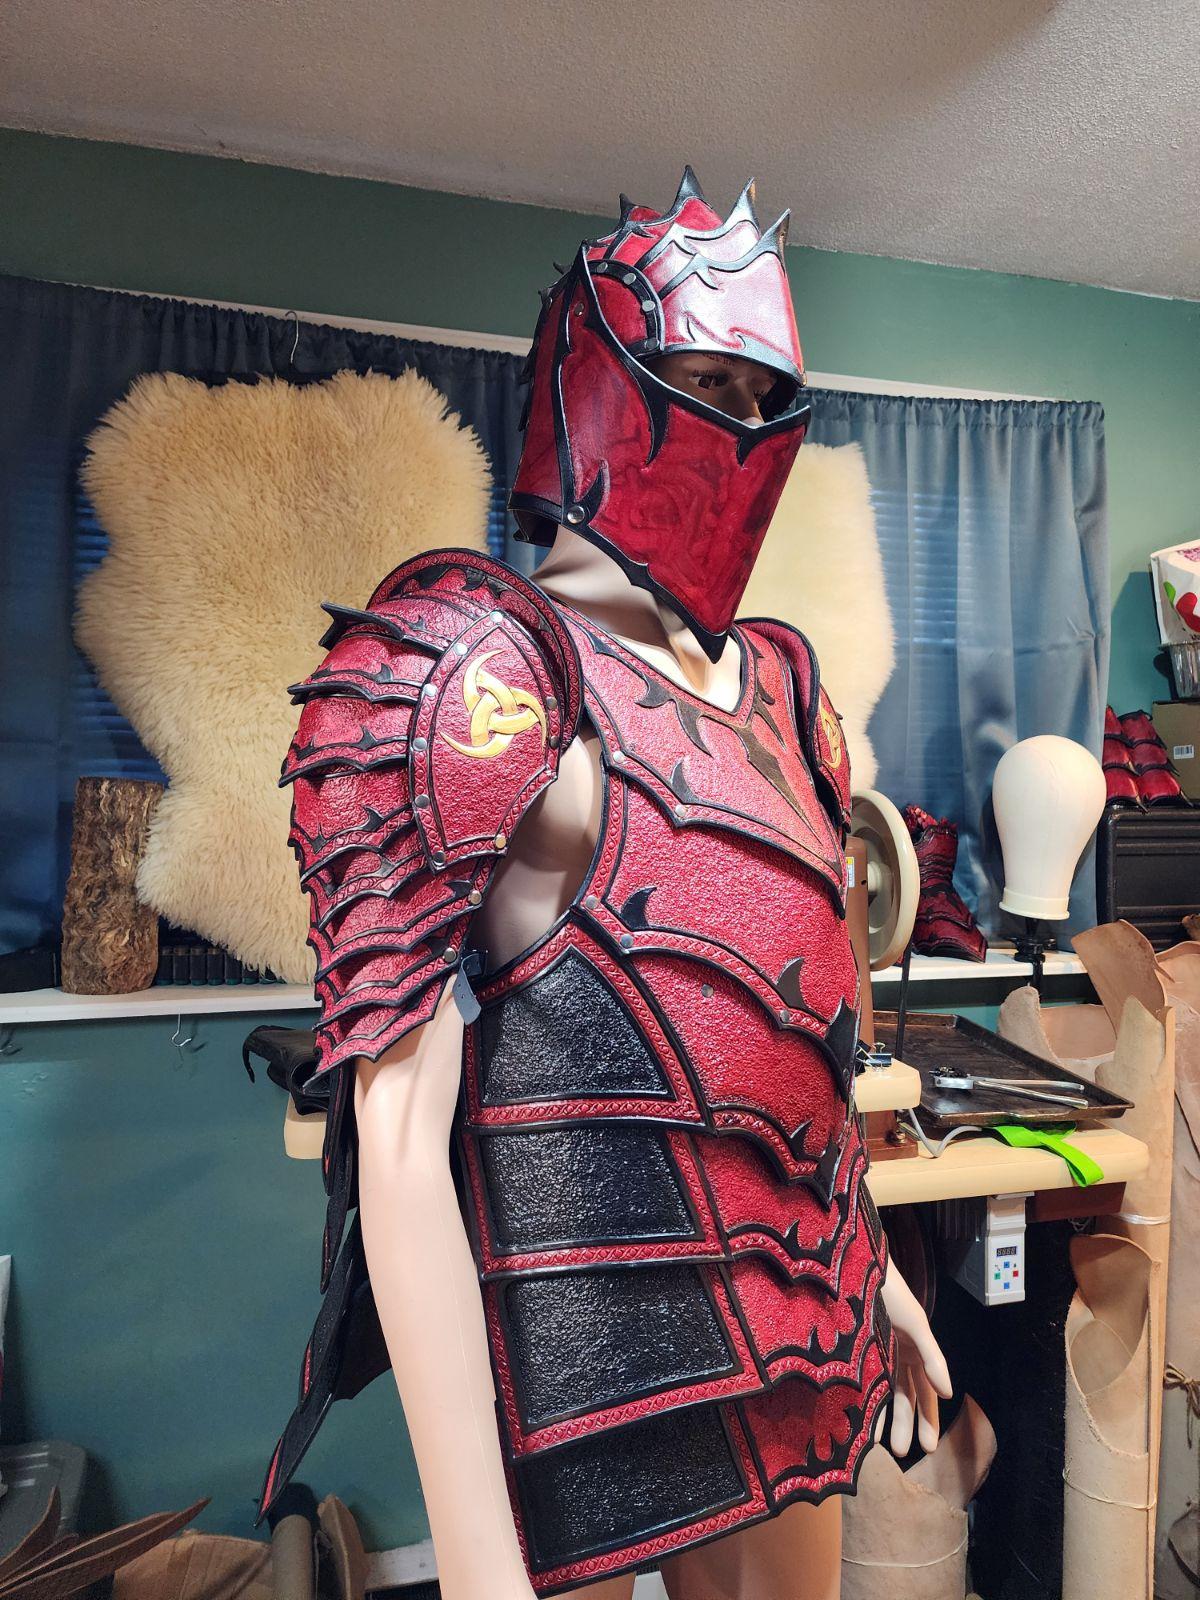 Leather armor that my dad is making